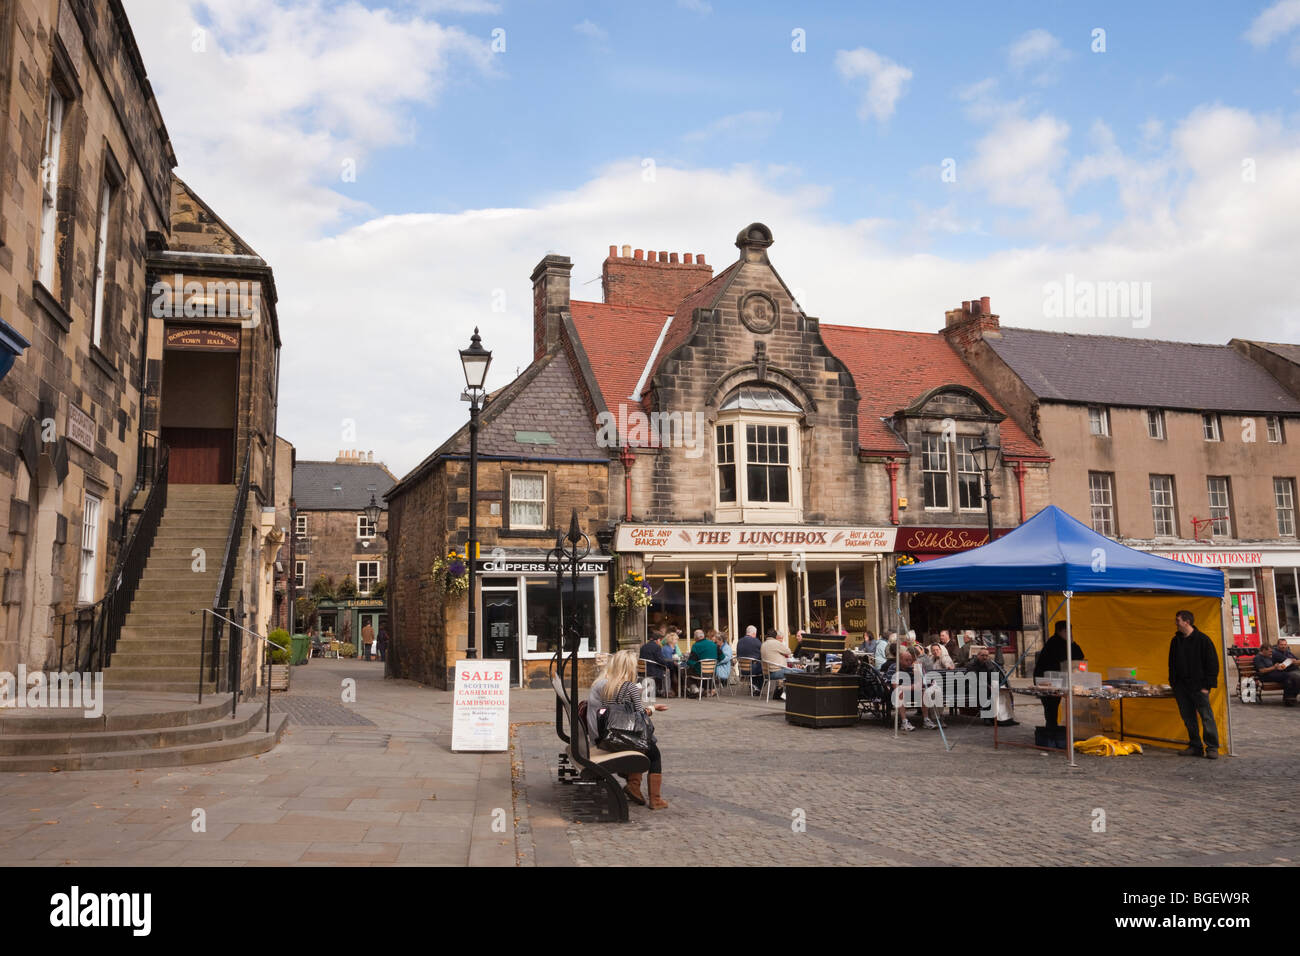 Market Place, Alnwick, Northumberland, England, UK, Europe. Local farmers market in town square Stock Photo